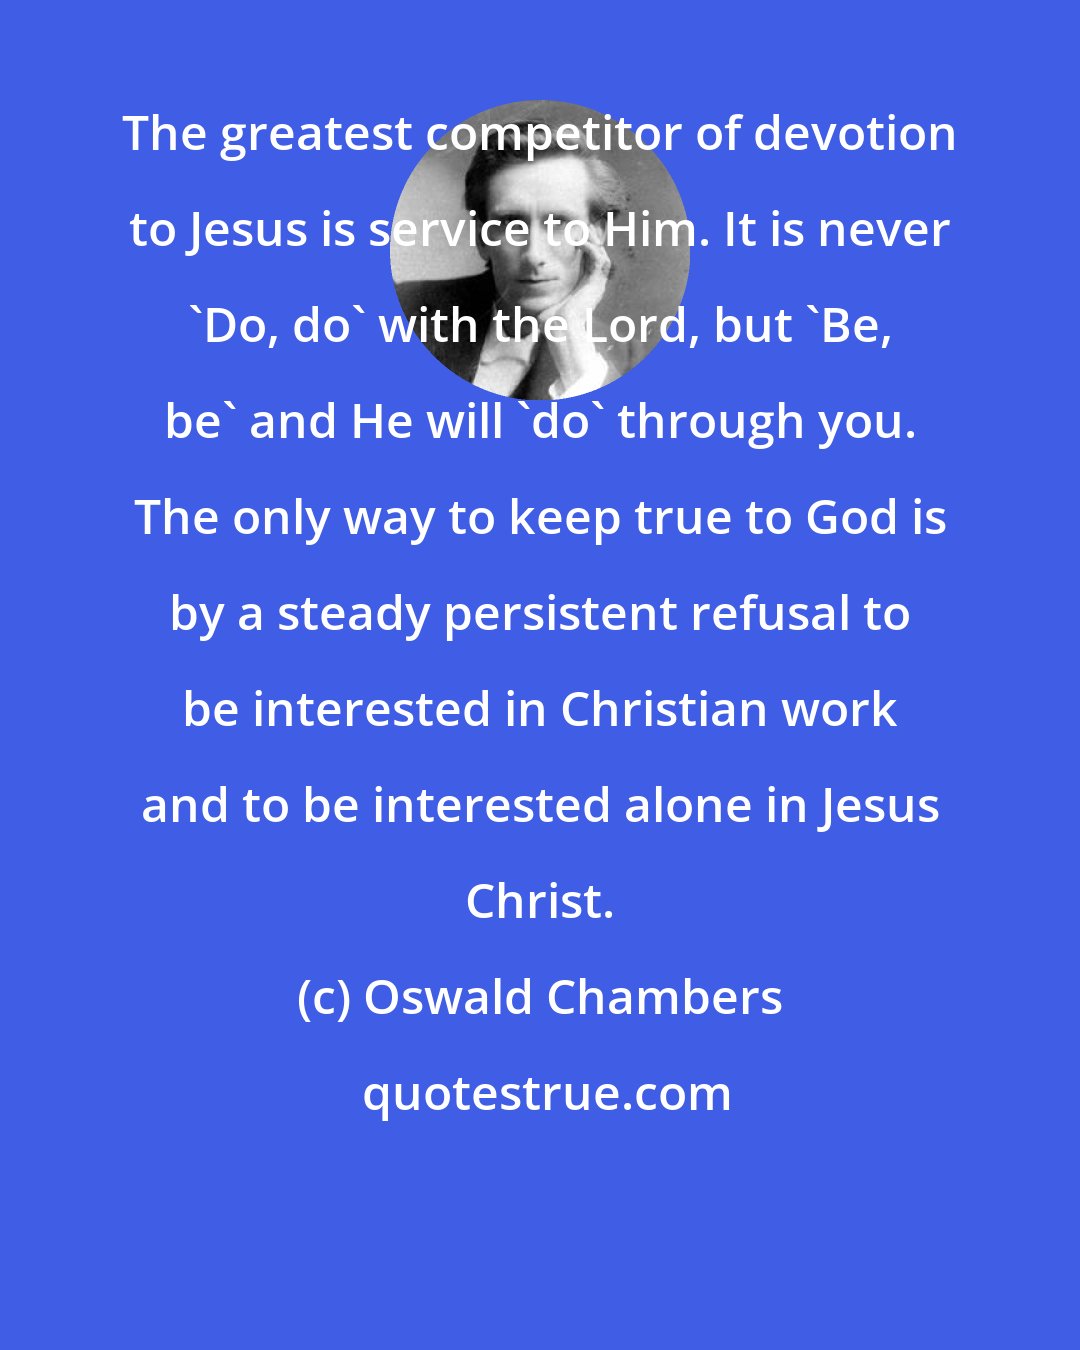 Oswald Chambers: The greatest competitor of devotion to Jesus is service to Him. It is never 'Do, do' with the Lord, but 'Be, be' and He will 'do' through you. The only way to keep true to God is by a steady persistent refusal to be interested in Christian work and to be interested alone in Jesus Christ.